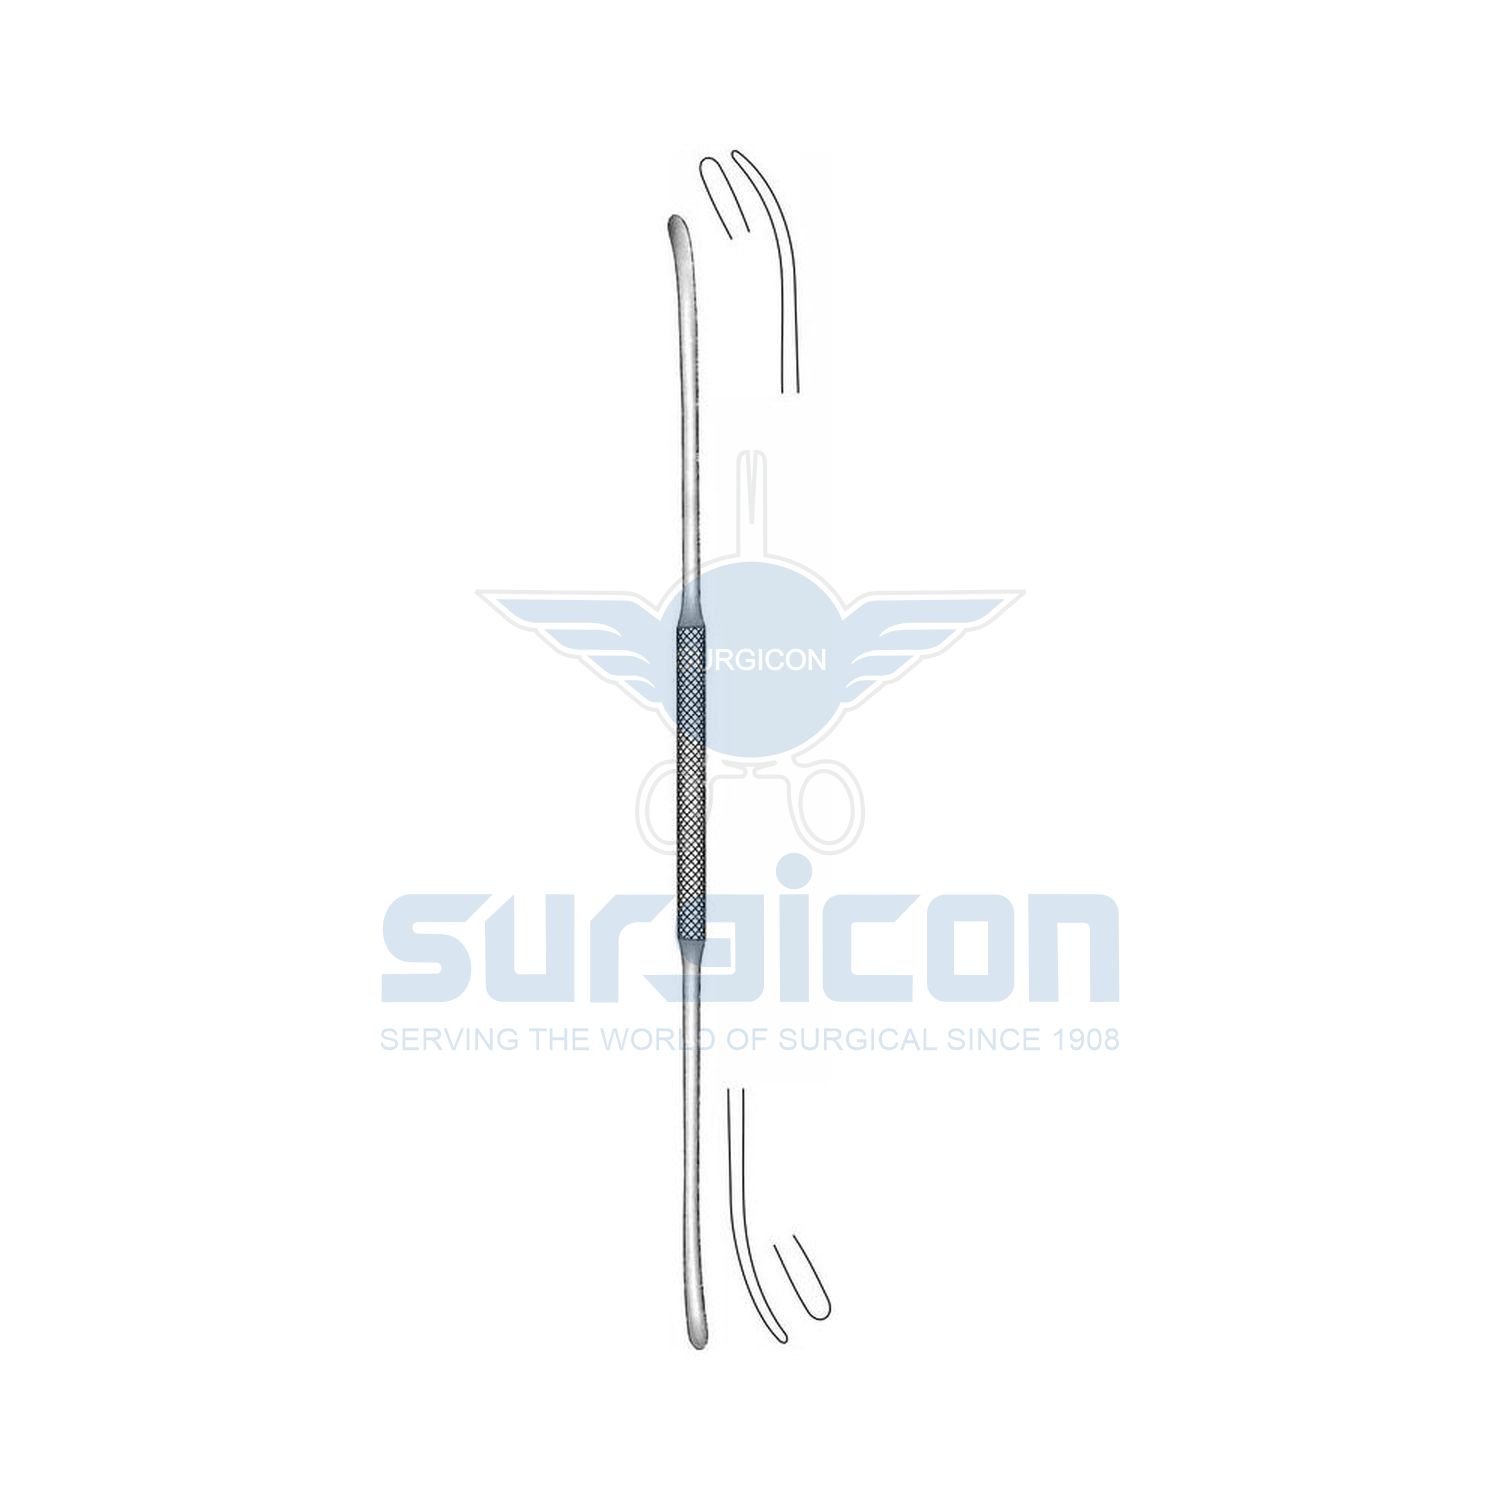 Olivecrona-Dissector-J-25-391